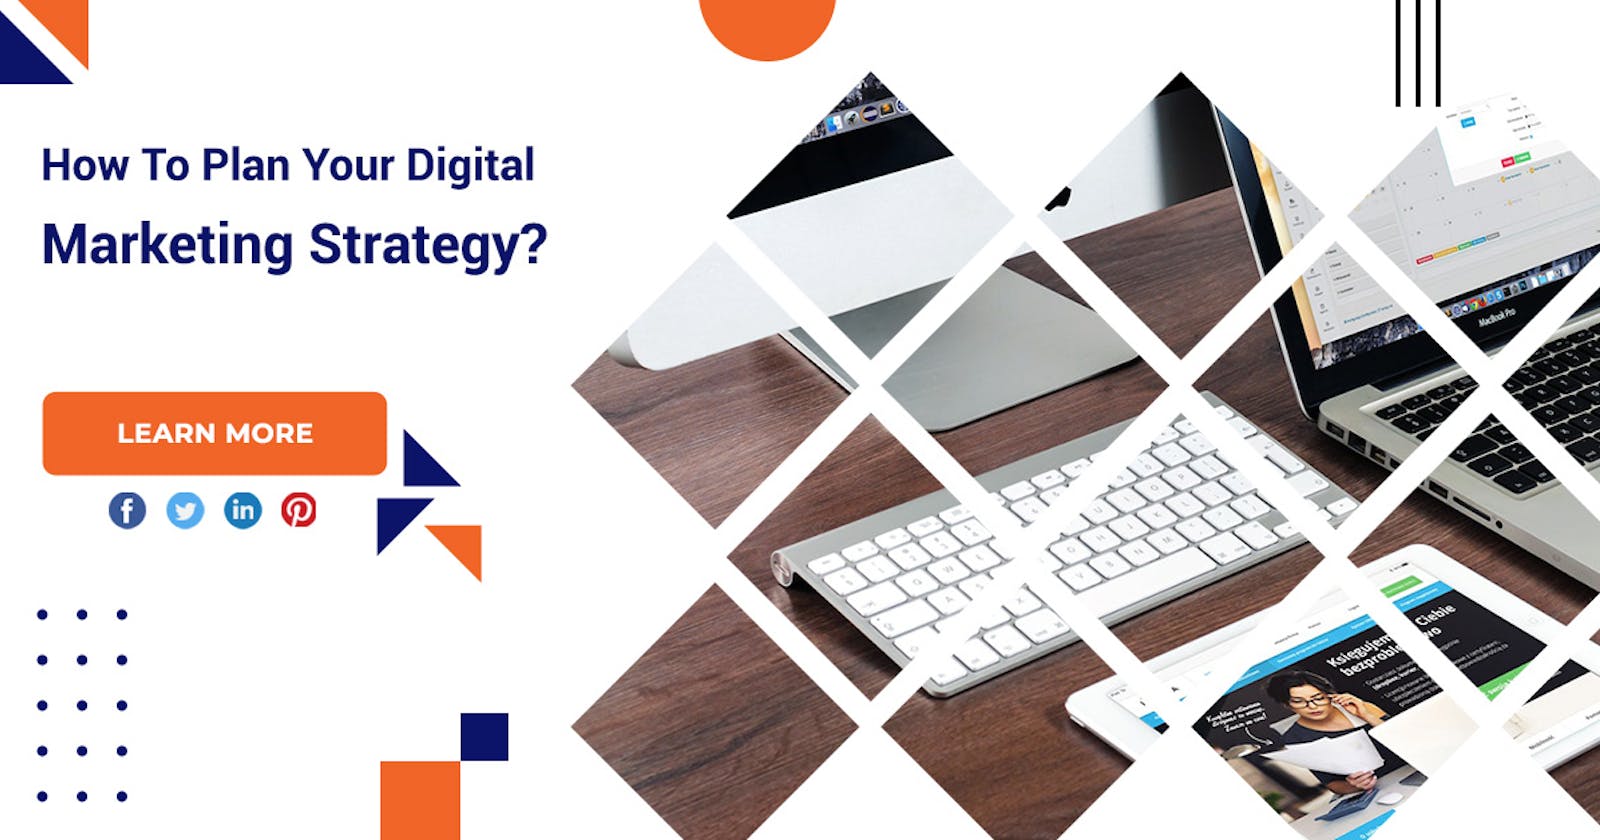 How To Plan Your Digital Marketing Strategy?